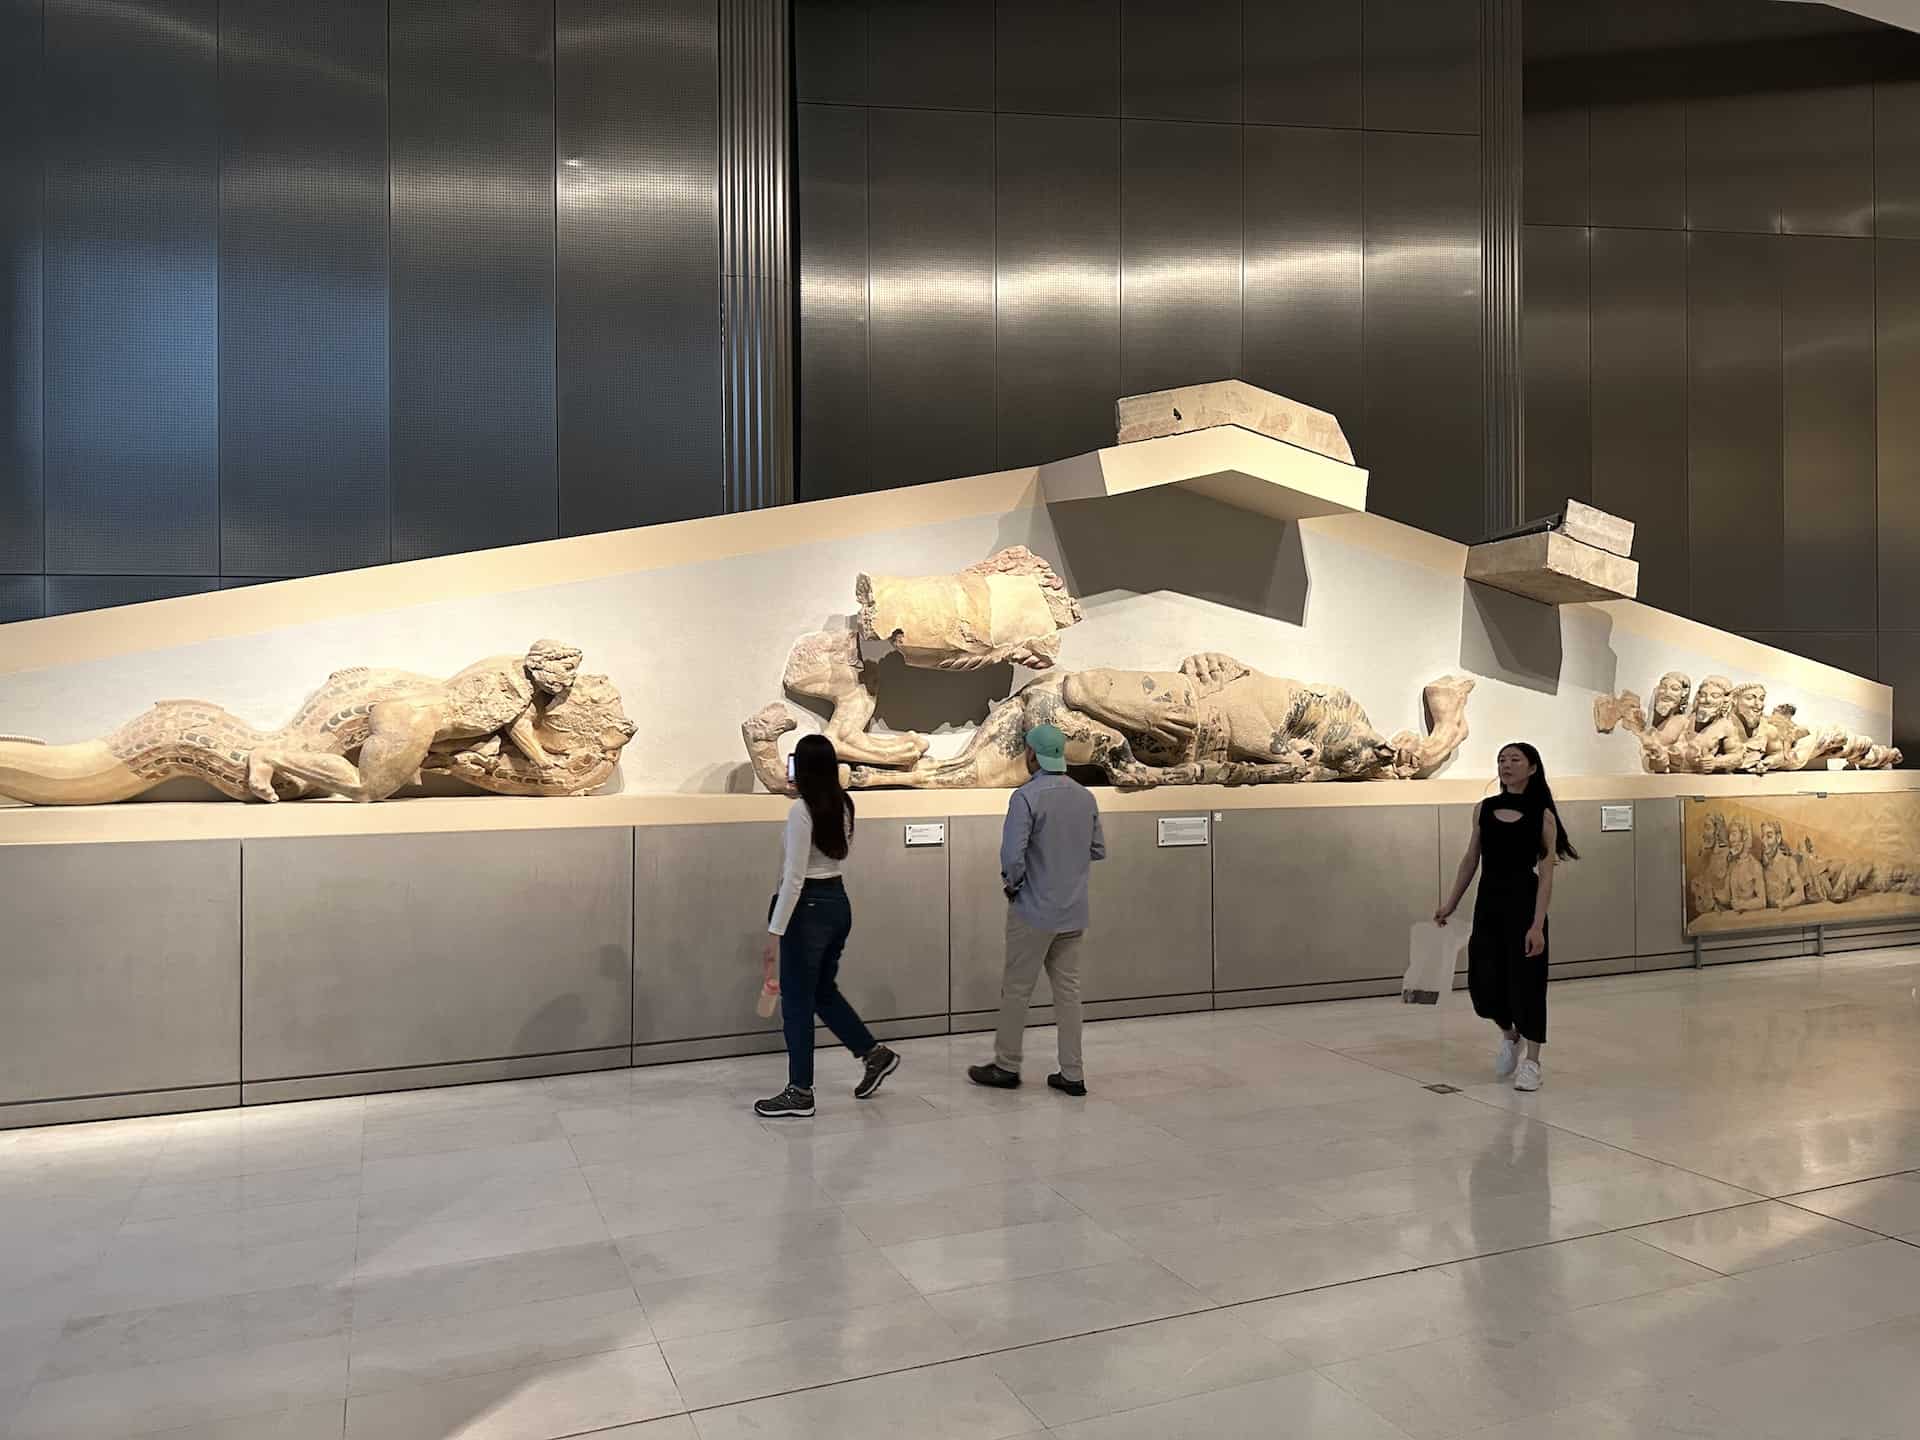 West pediment of the Hekatompedon at the Acropolis Museum in Athens, Greece